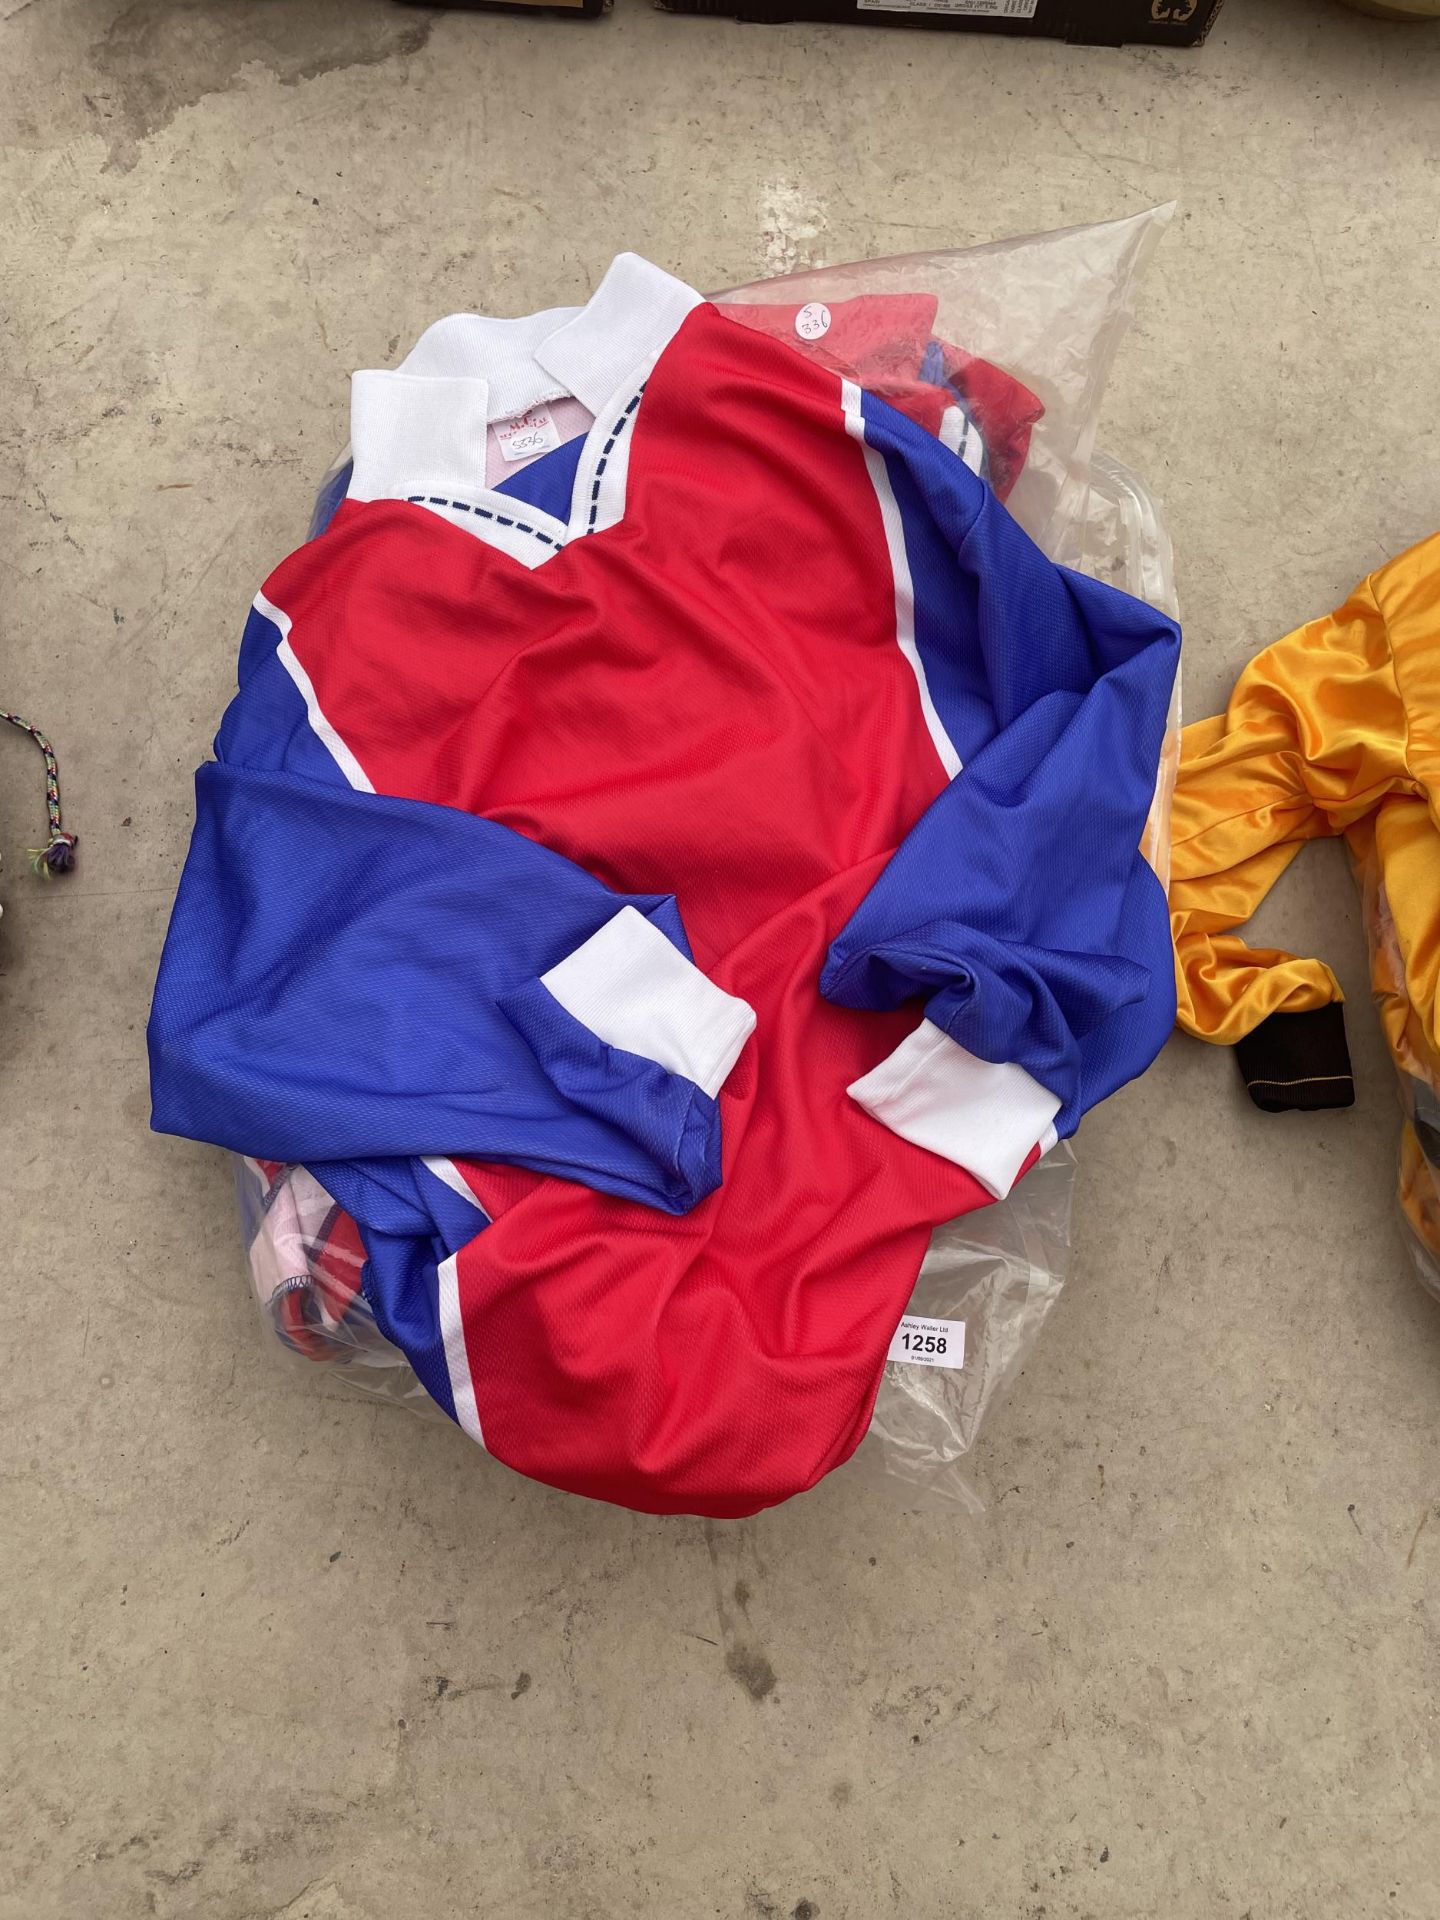 A COLLECTION OF BLUE, RED AND WHITE M.G SPORTSWEAR FOOTBALL TOPS